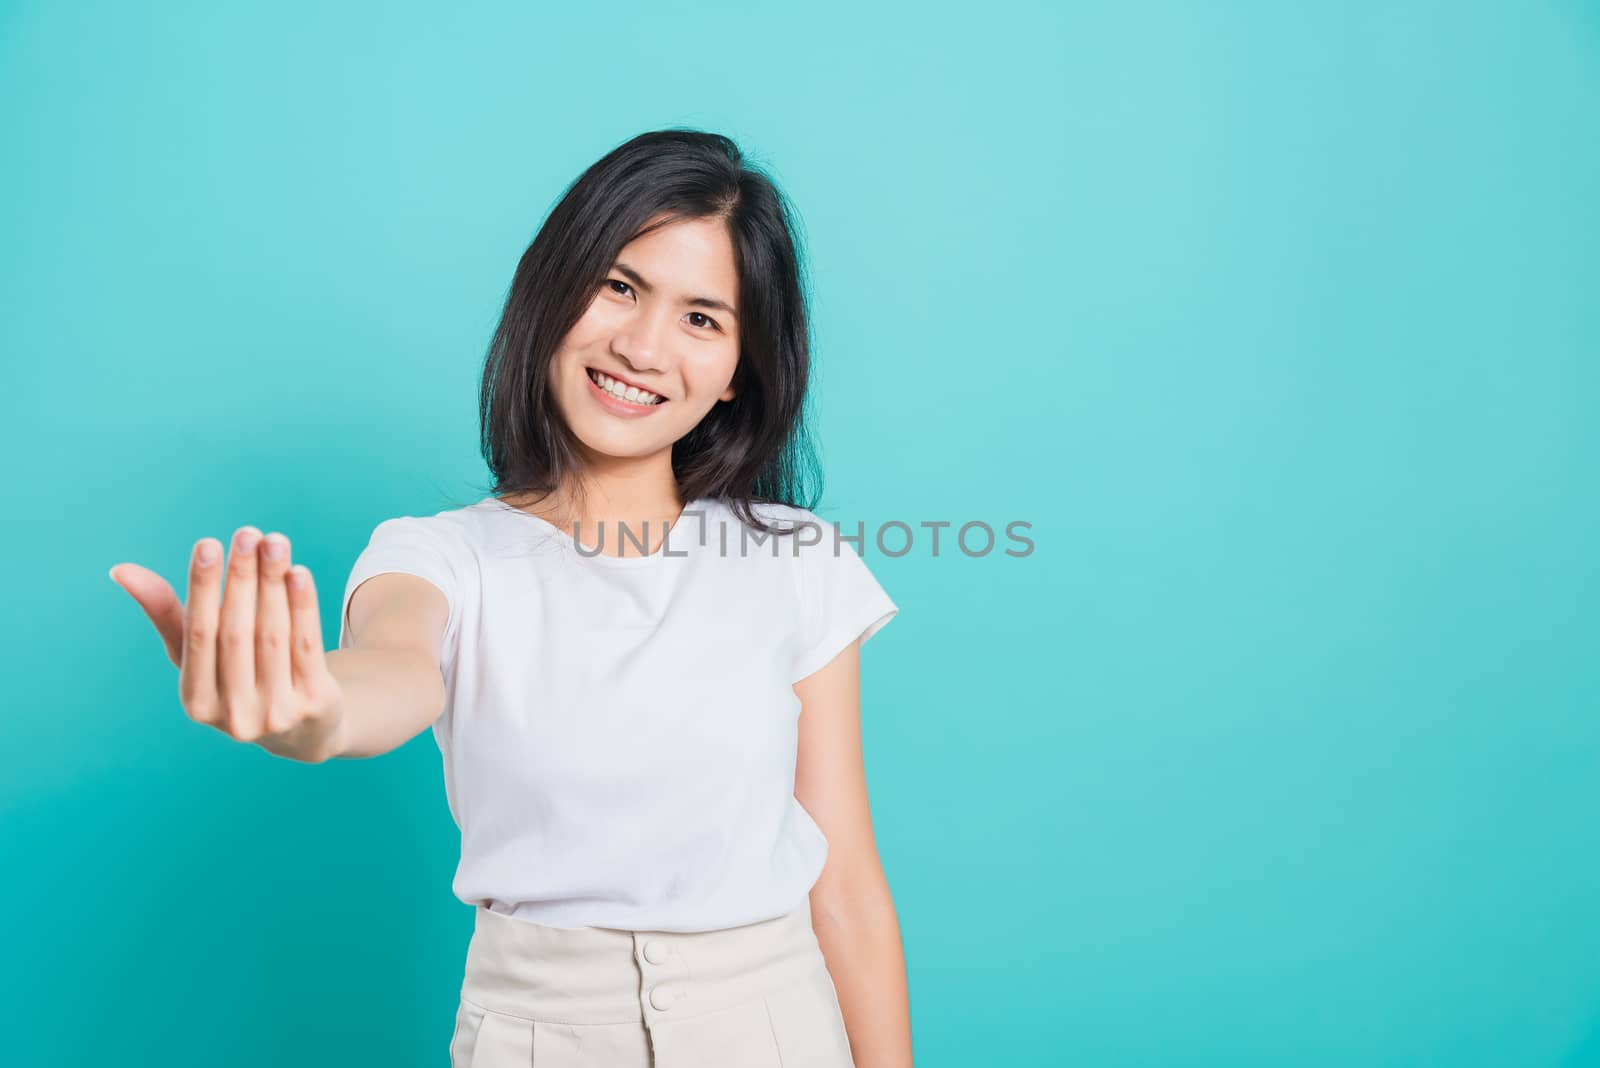 woman smile wear white t-shirt making gesture with hand inviting by Sorapop